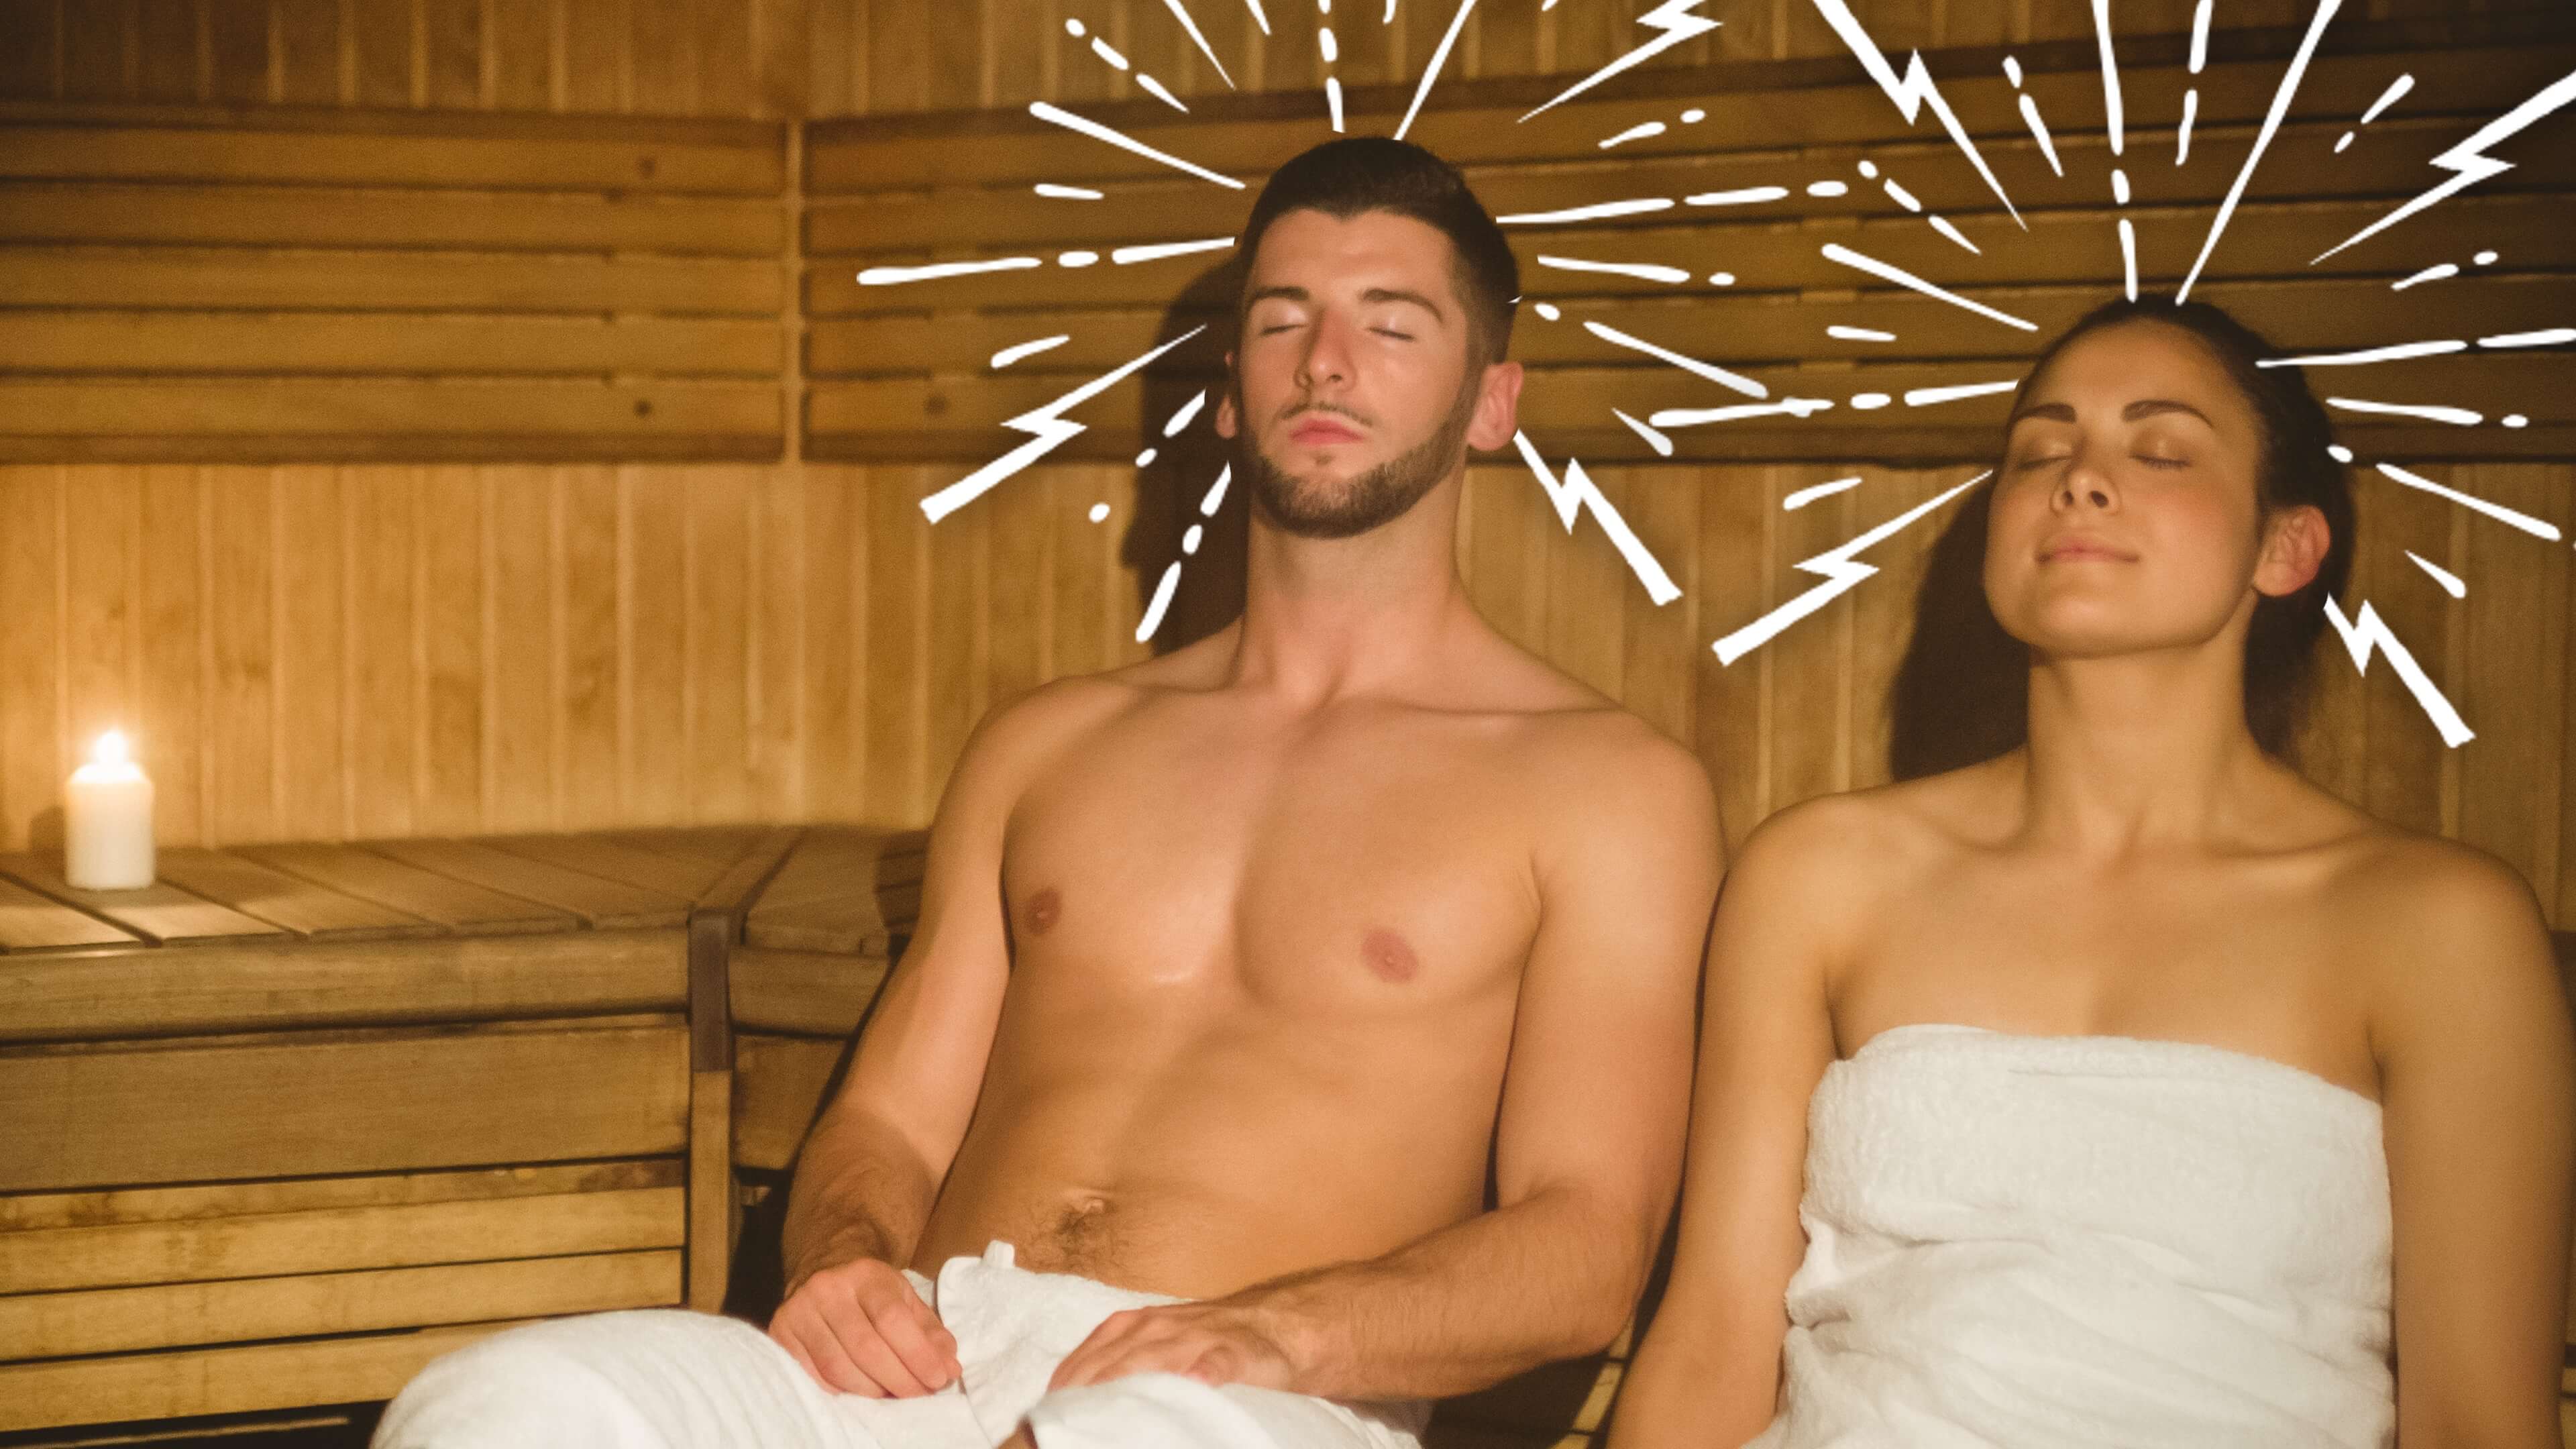 Exercise and sauna bathing boost heart health more than exercise alone